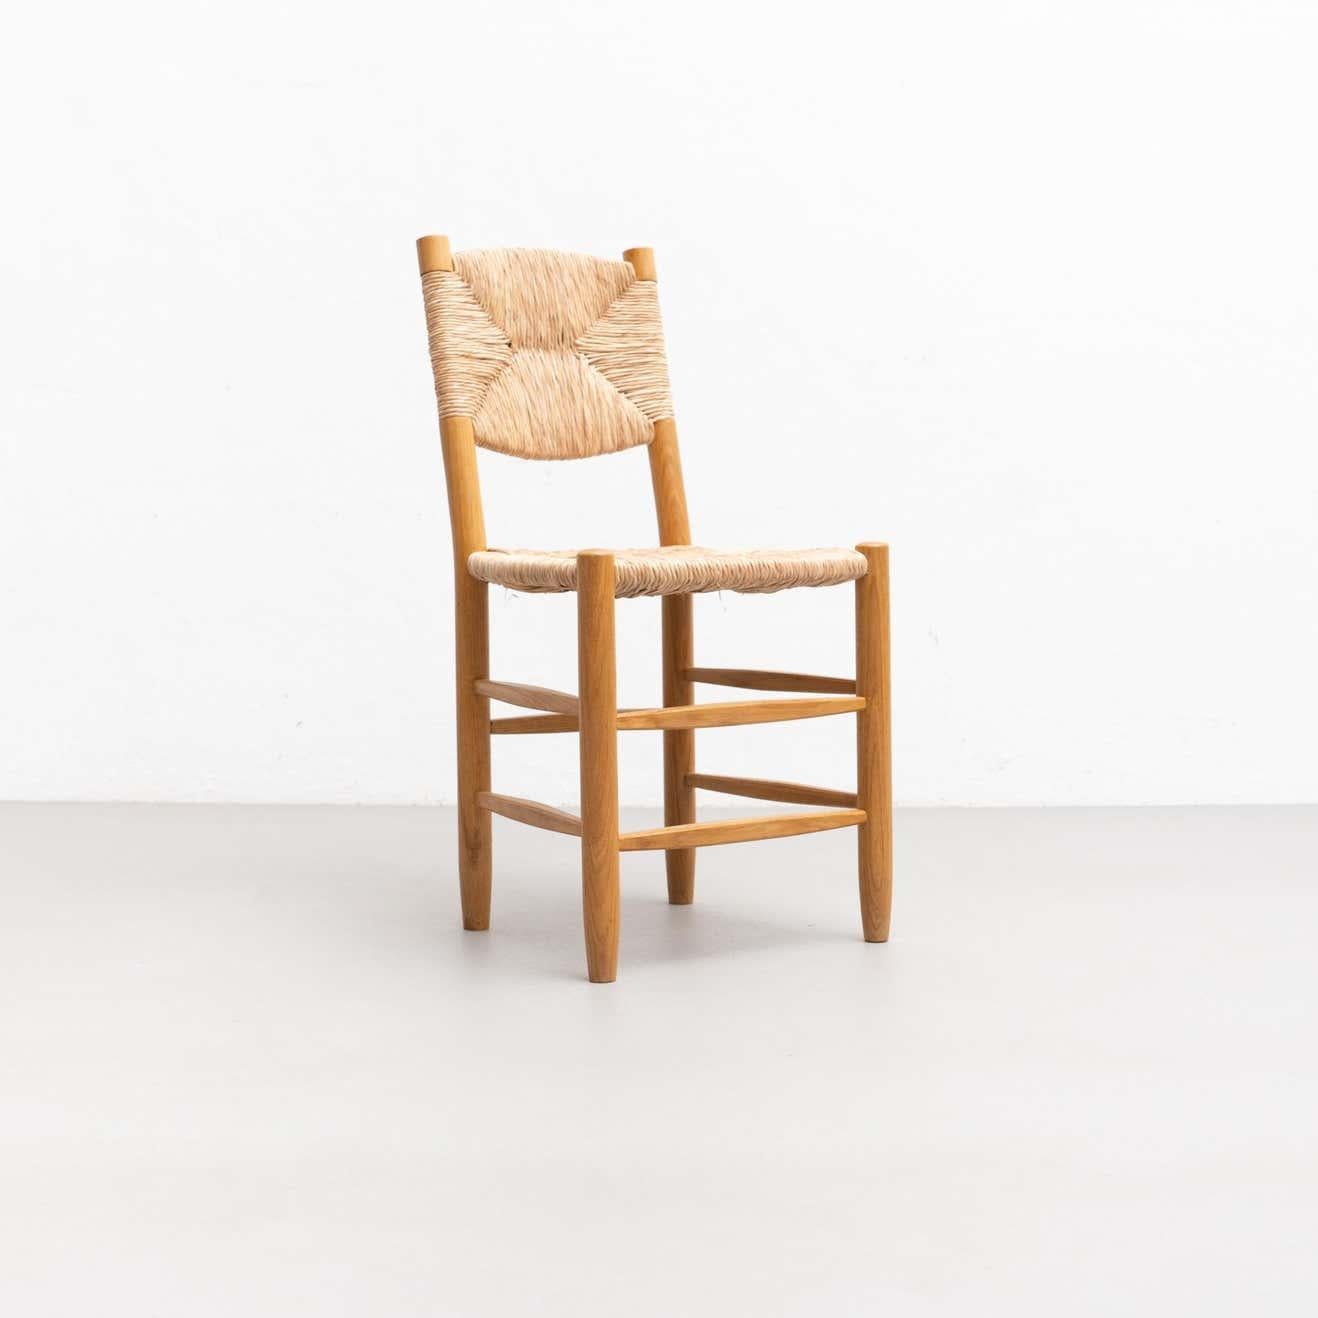 French After Charlotte Perriand N.19 Chair, Wood Rattan, Mid-Century Modern For Sale